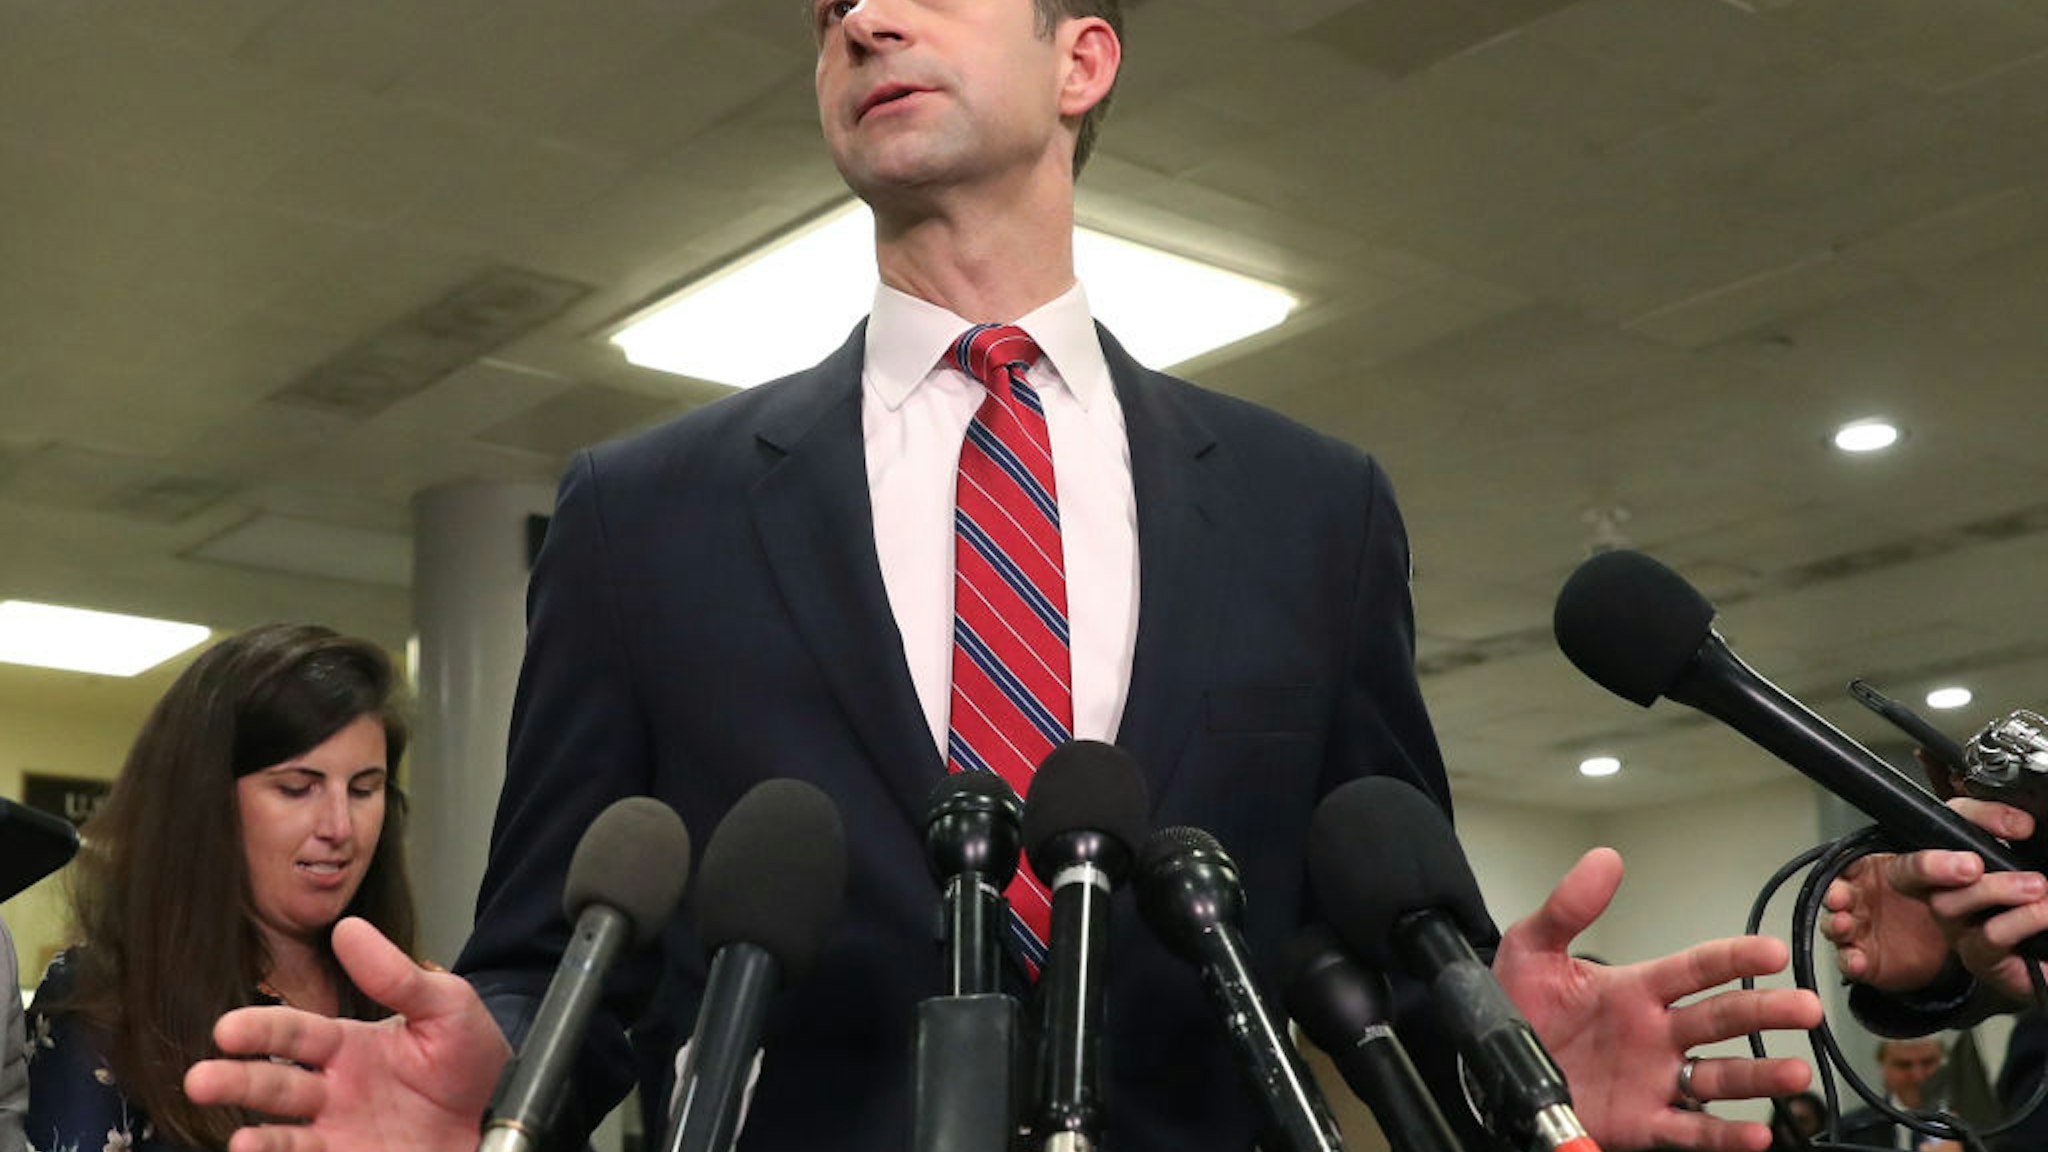 Sen. Tom Cotton (R-AR) speaks to the media after attending a briefing with administration officials about the situation with Iran, at the U.S. Capitol on January 8, 2020 in Washington, DC.